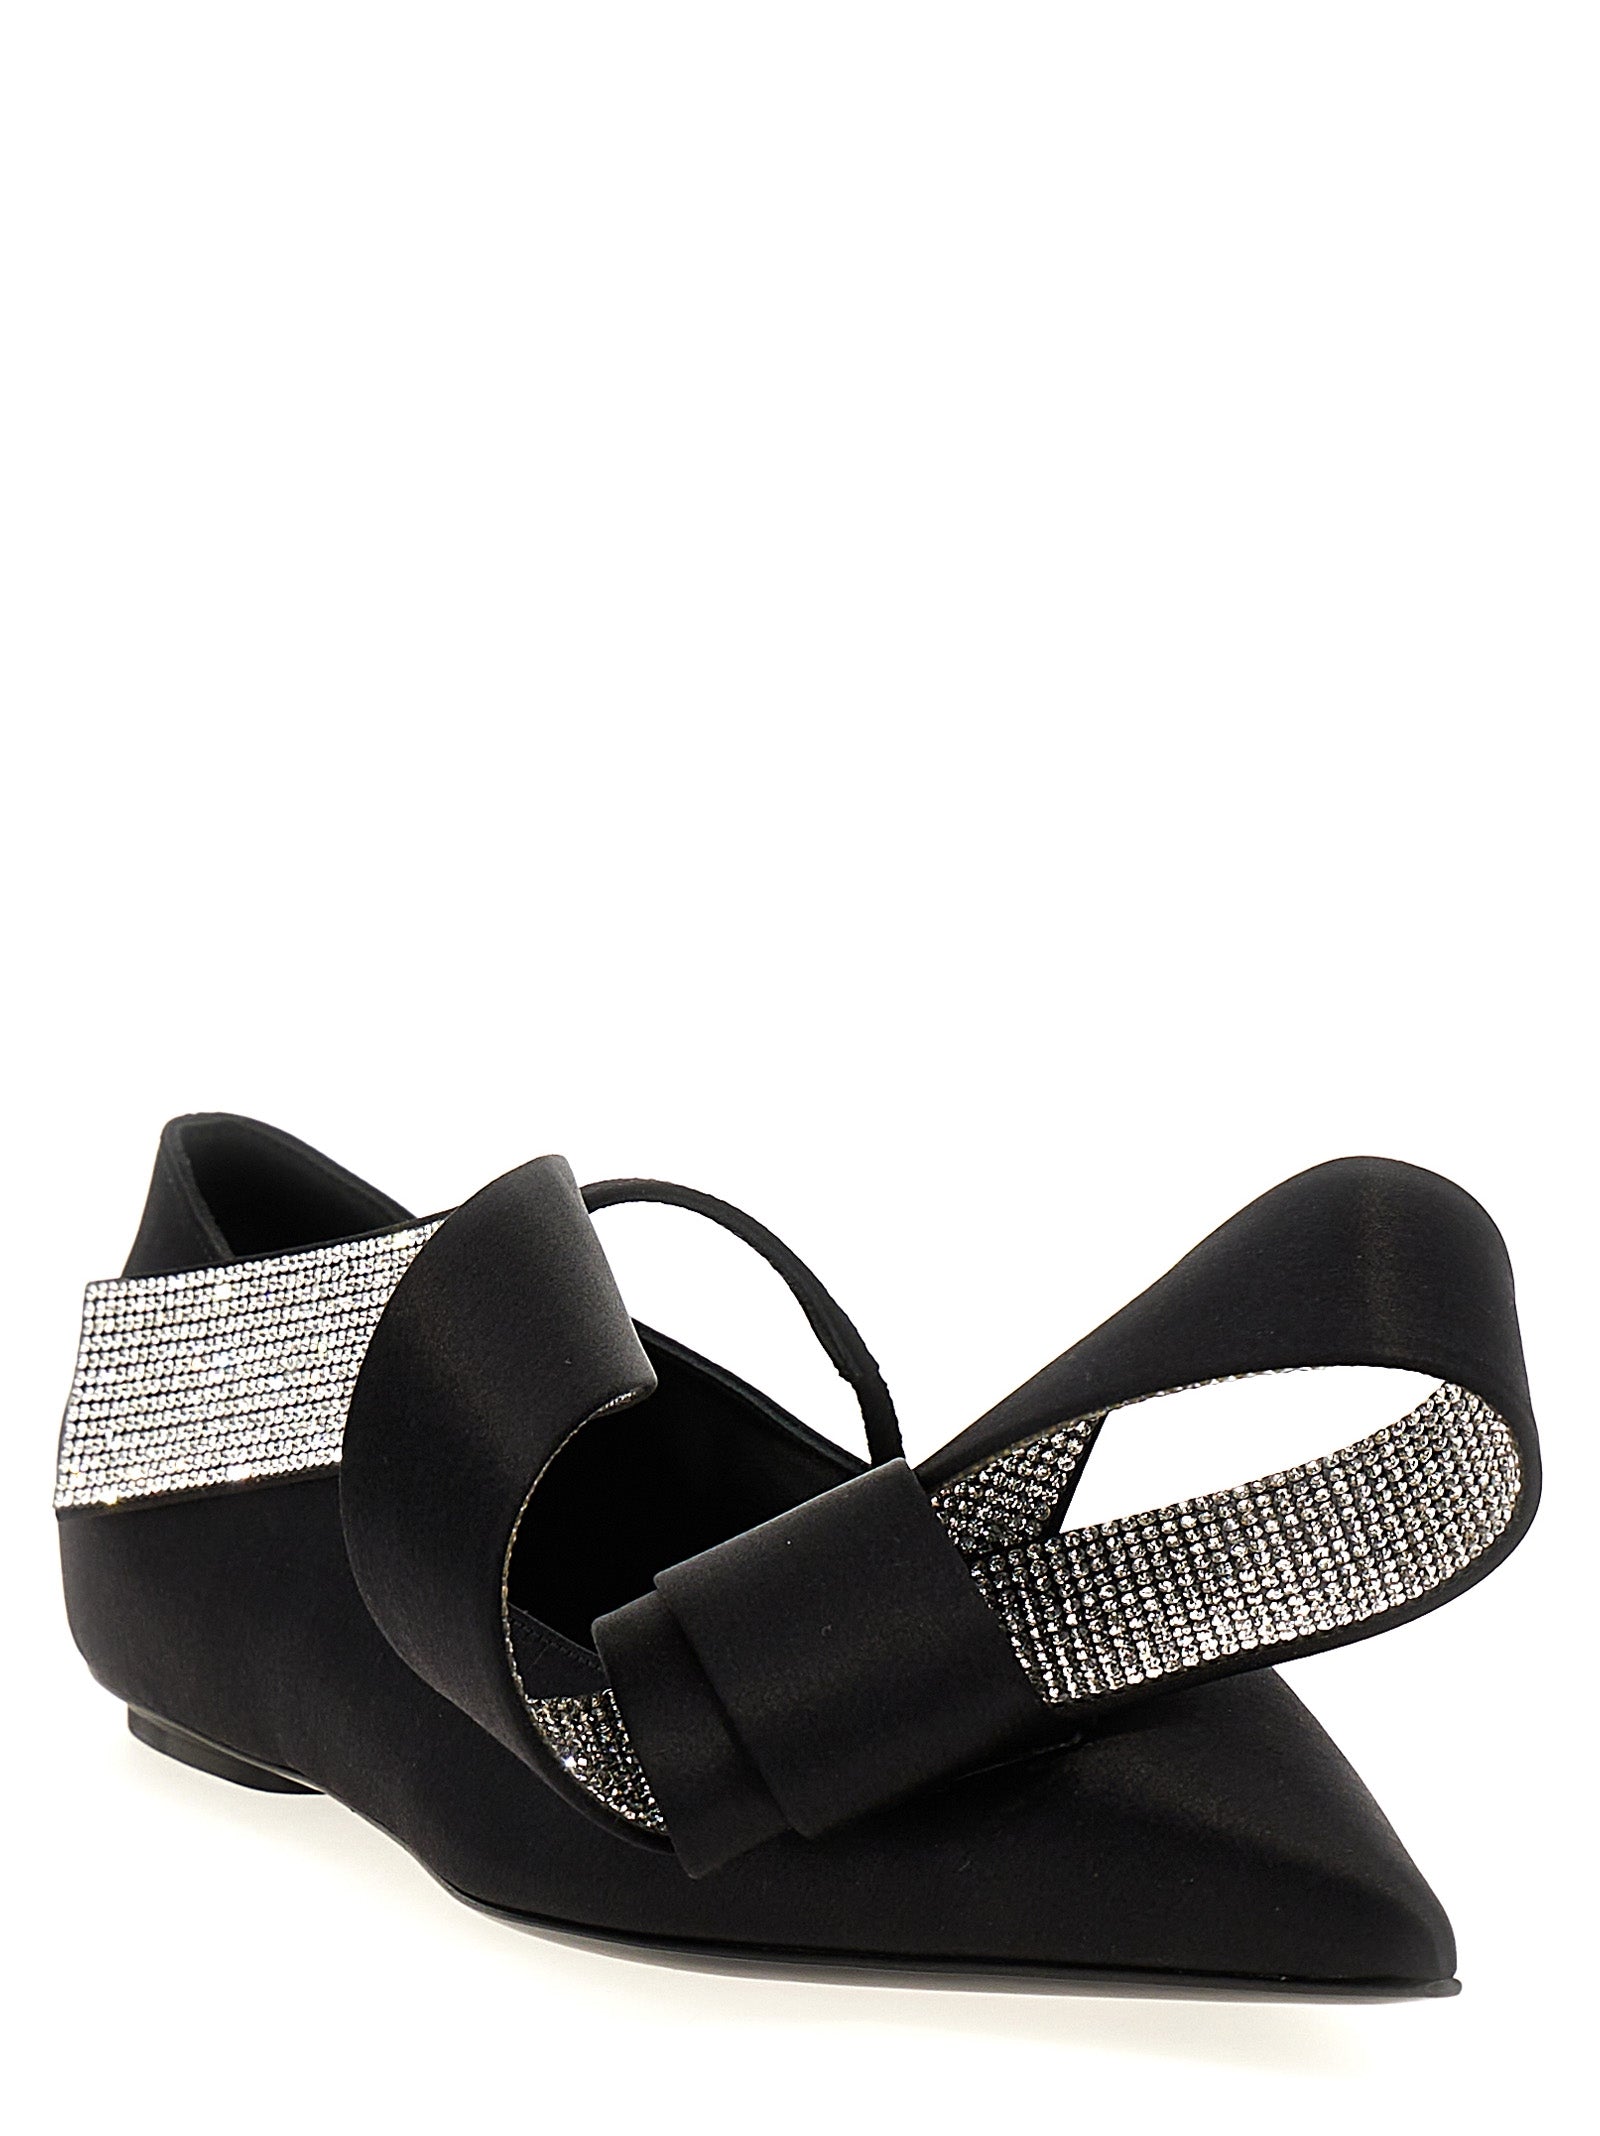 Shop Sergio Rossi Area Maquise Flat Shoes Black